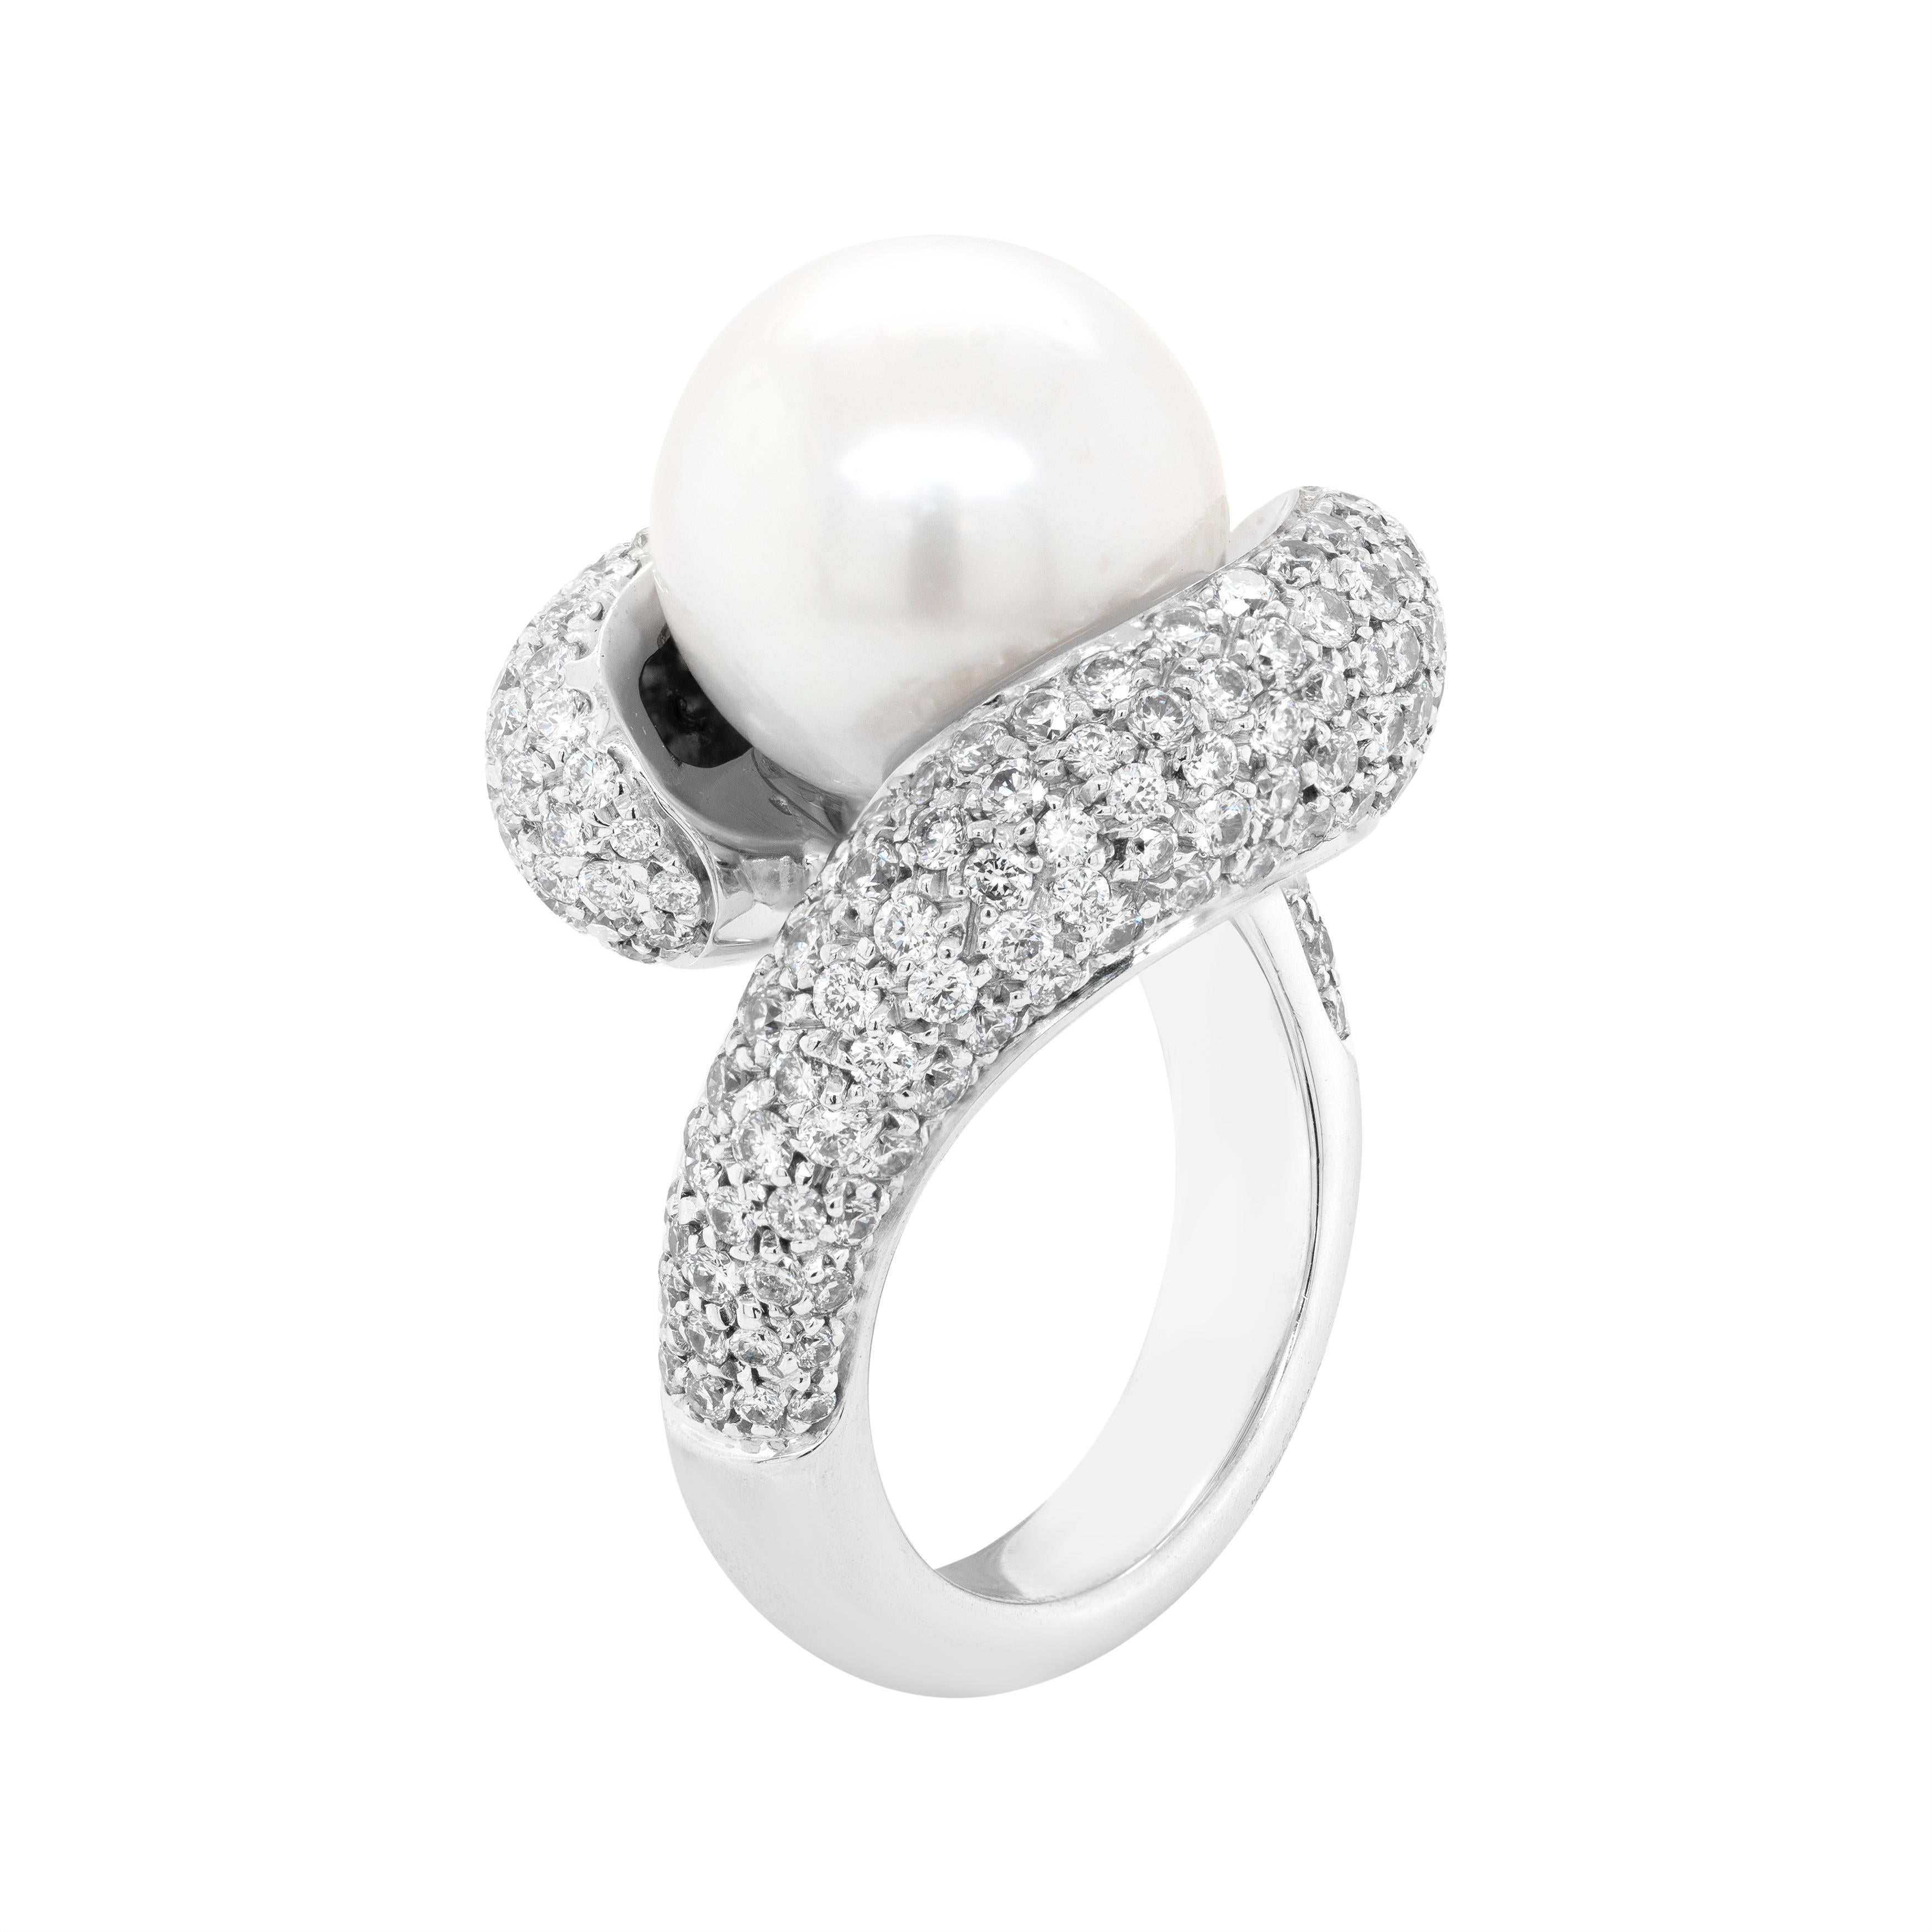 This sophisticated cocktail ring features a gorgeous  12mm white South Sea pearl in the centre of a twist cross-over mount, pavè set with round brilliant cut diamonds with an approximate total weight of 3.00 carats. The band graduates from 7.3mm to